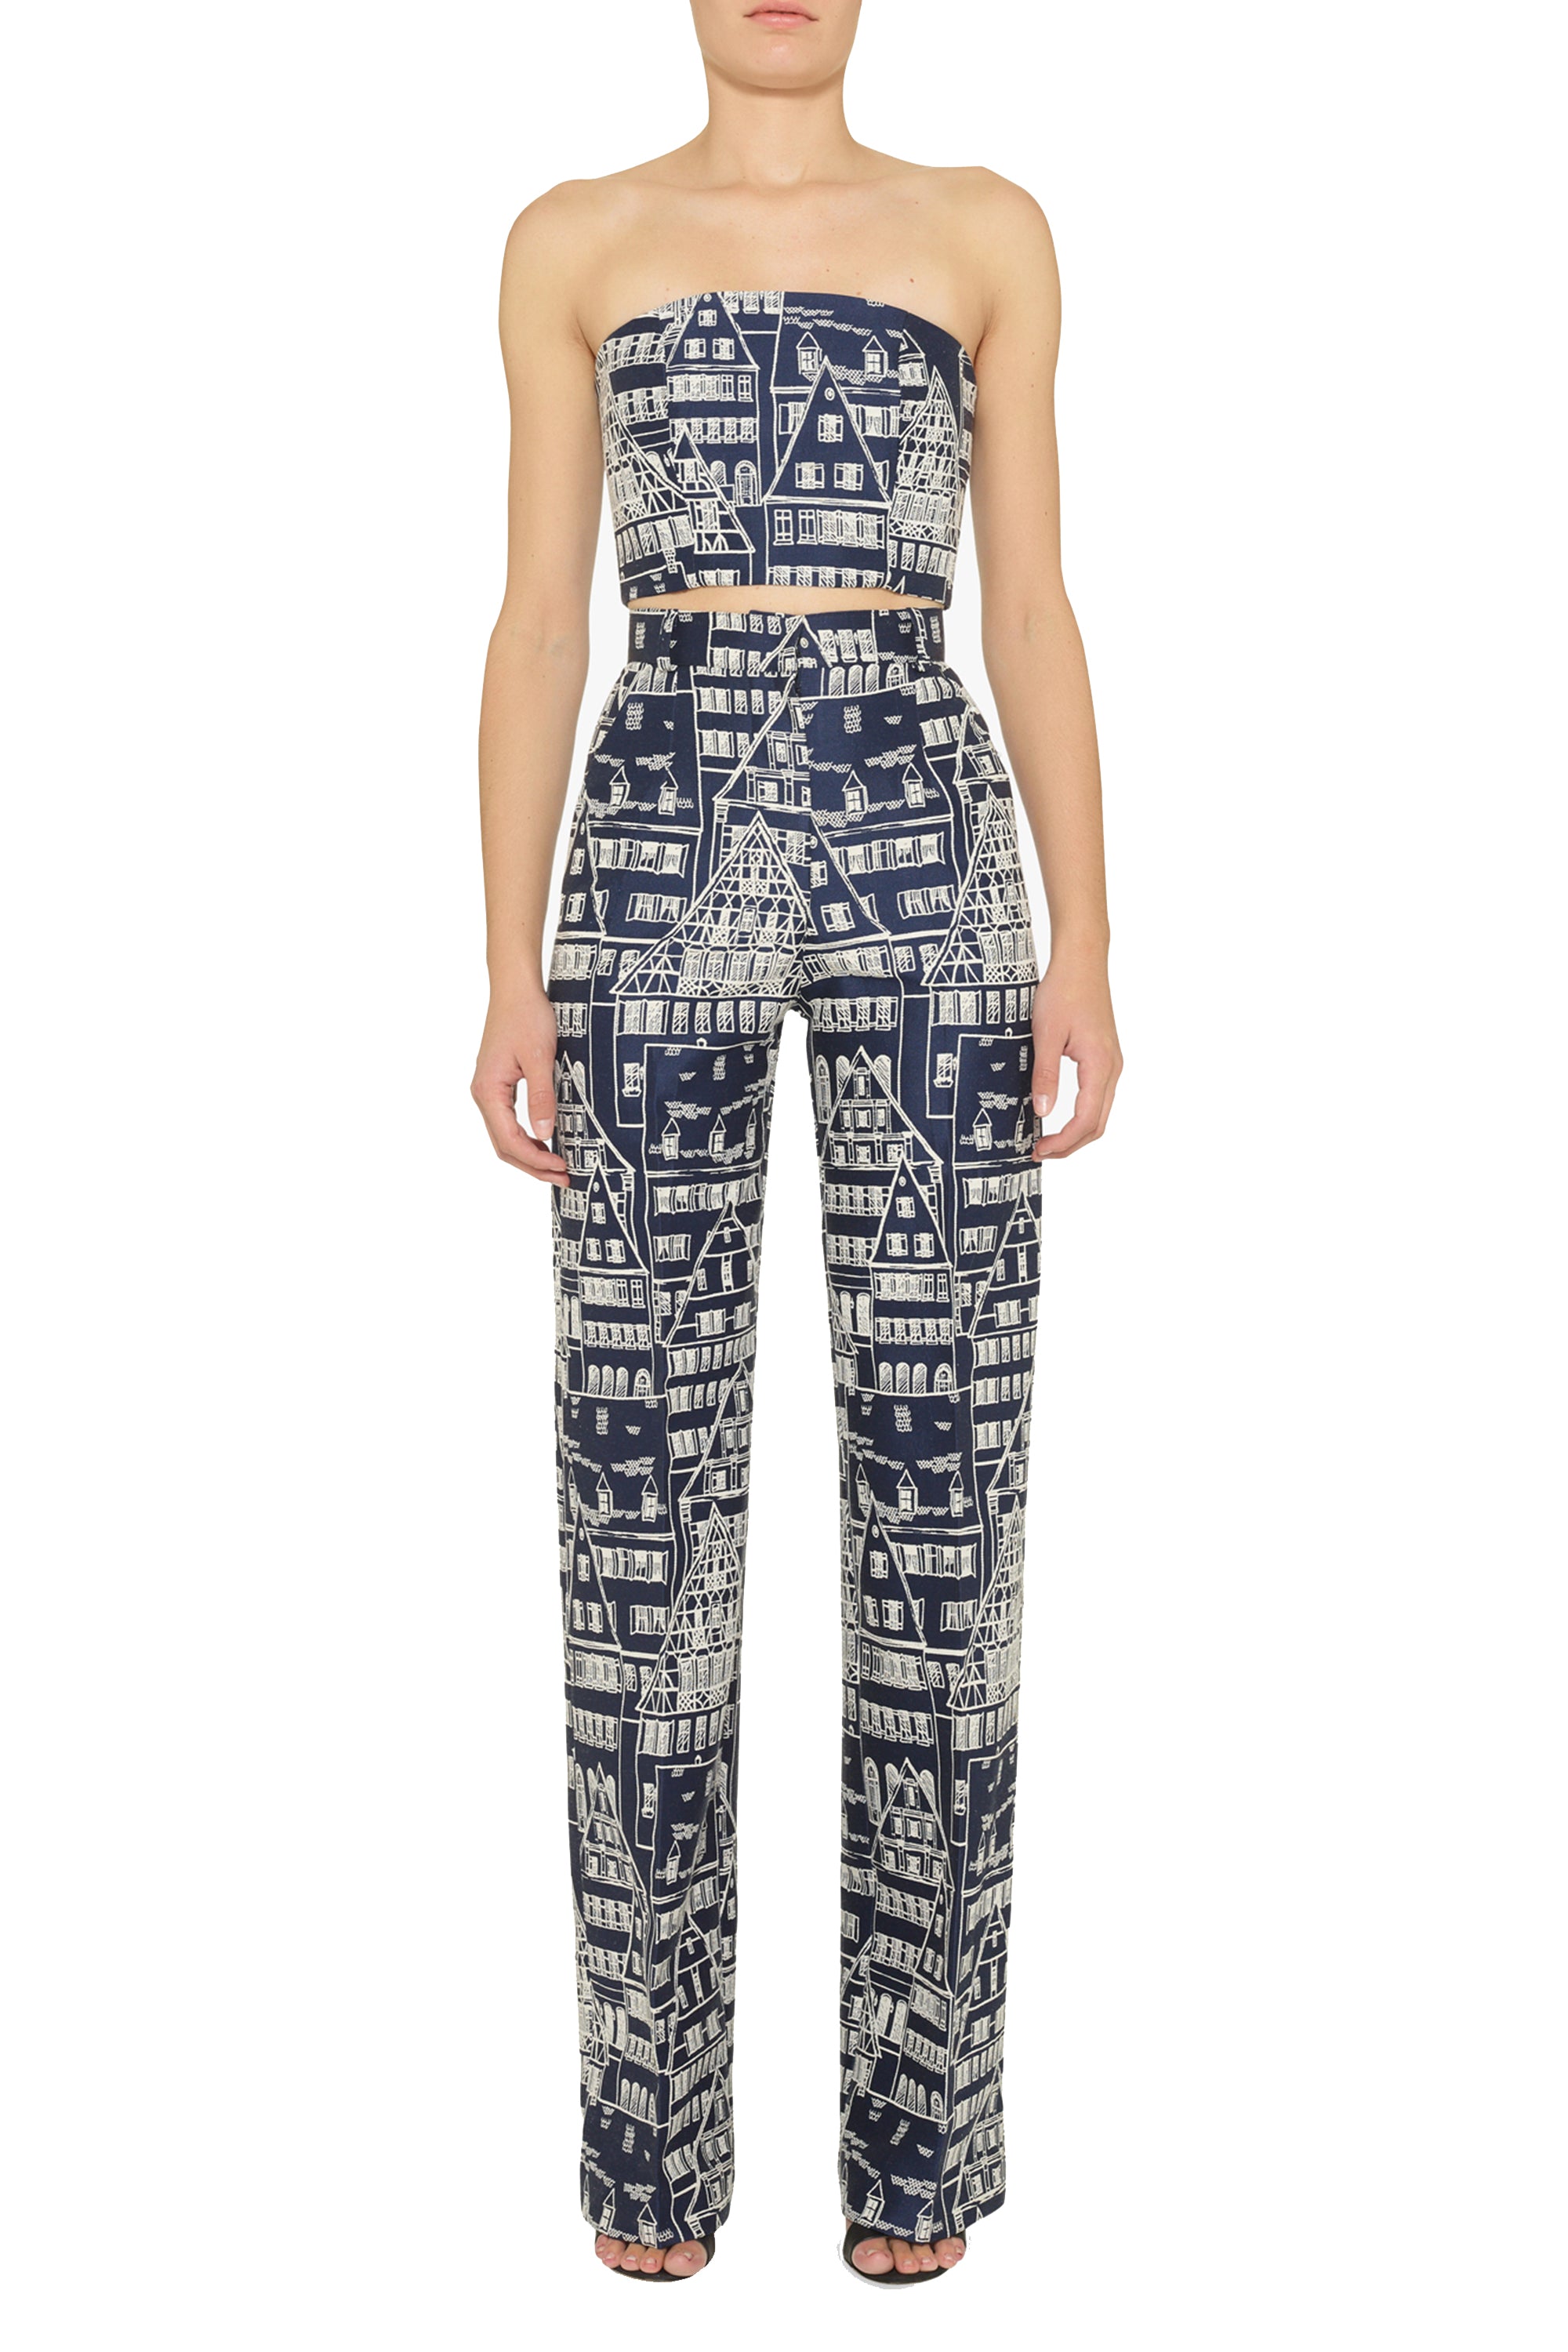 House Party Trousers